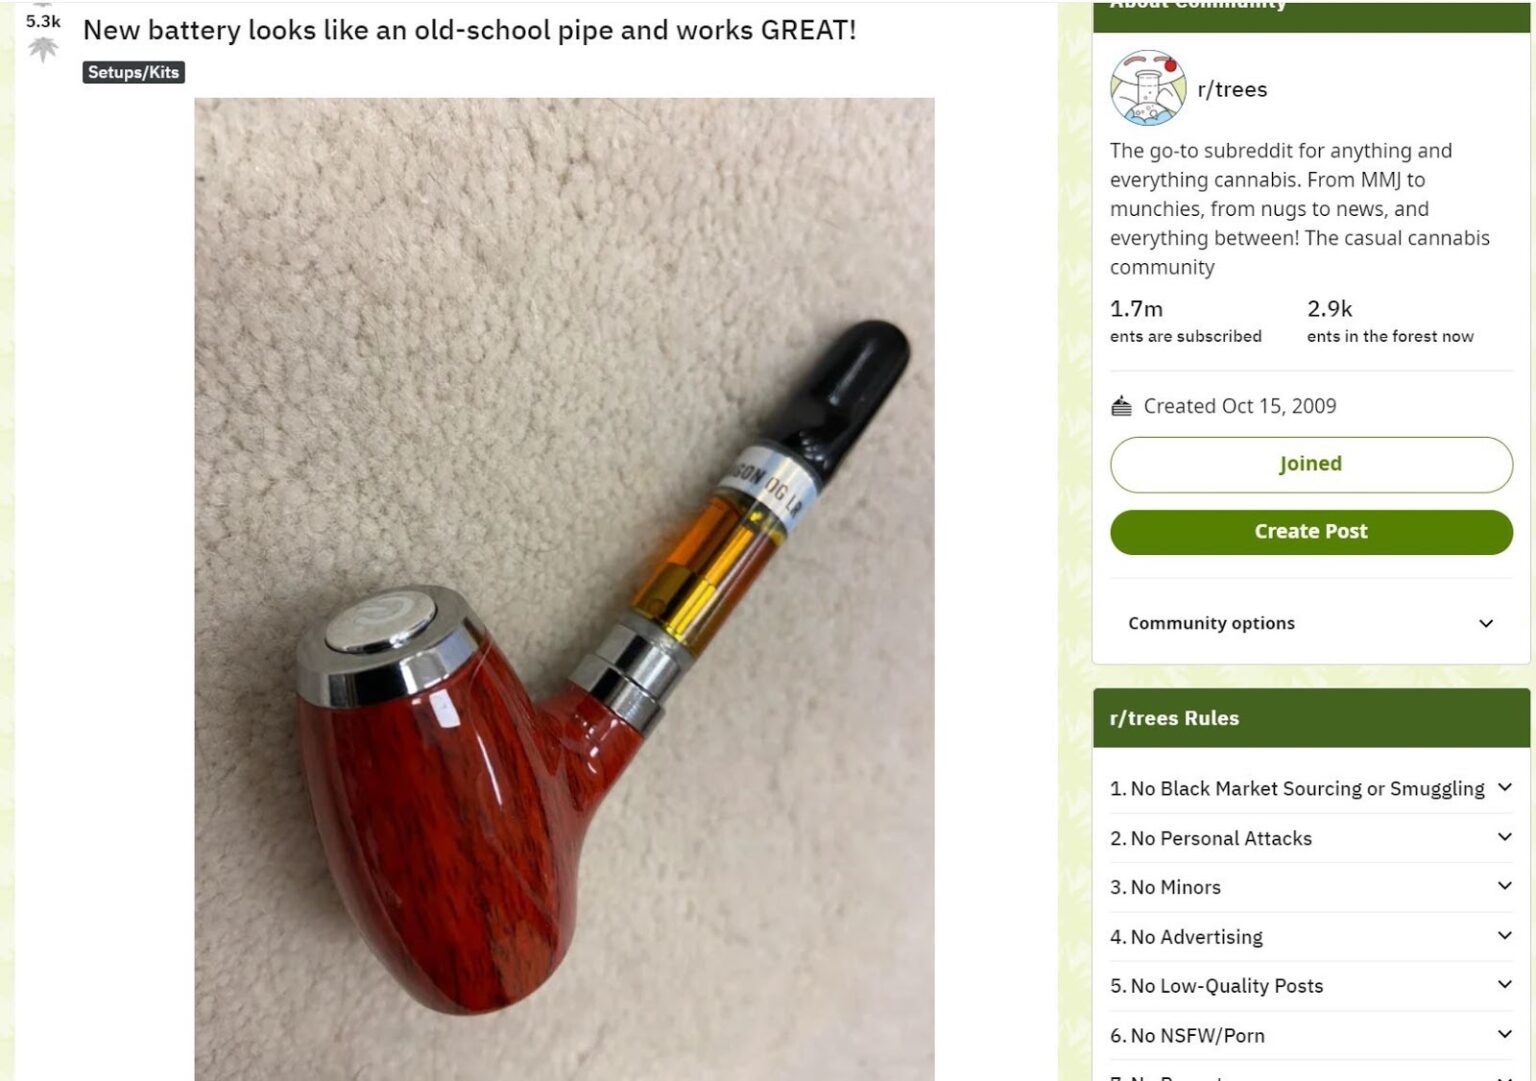 You probably saw people on instagram and reddit with a vape battery that looks like a wooden pipe. Learn more about the viral vape now!